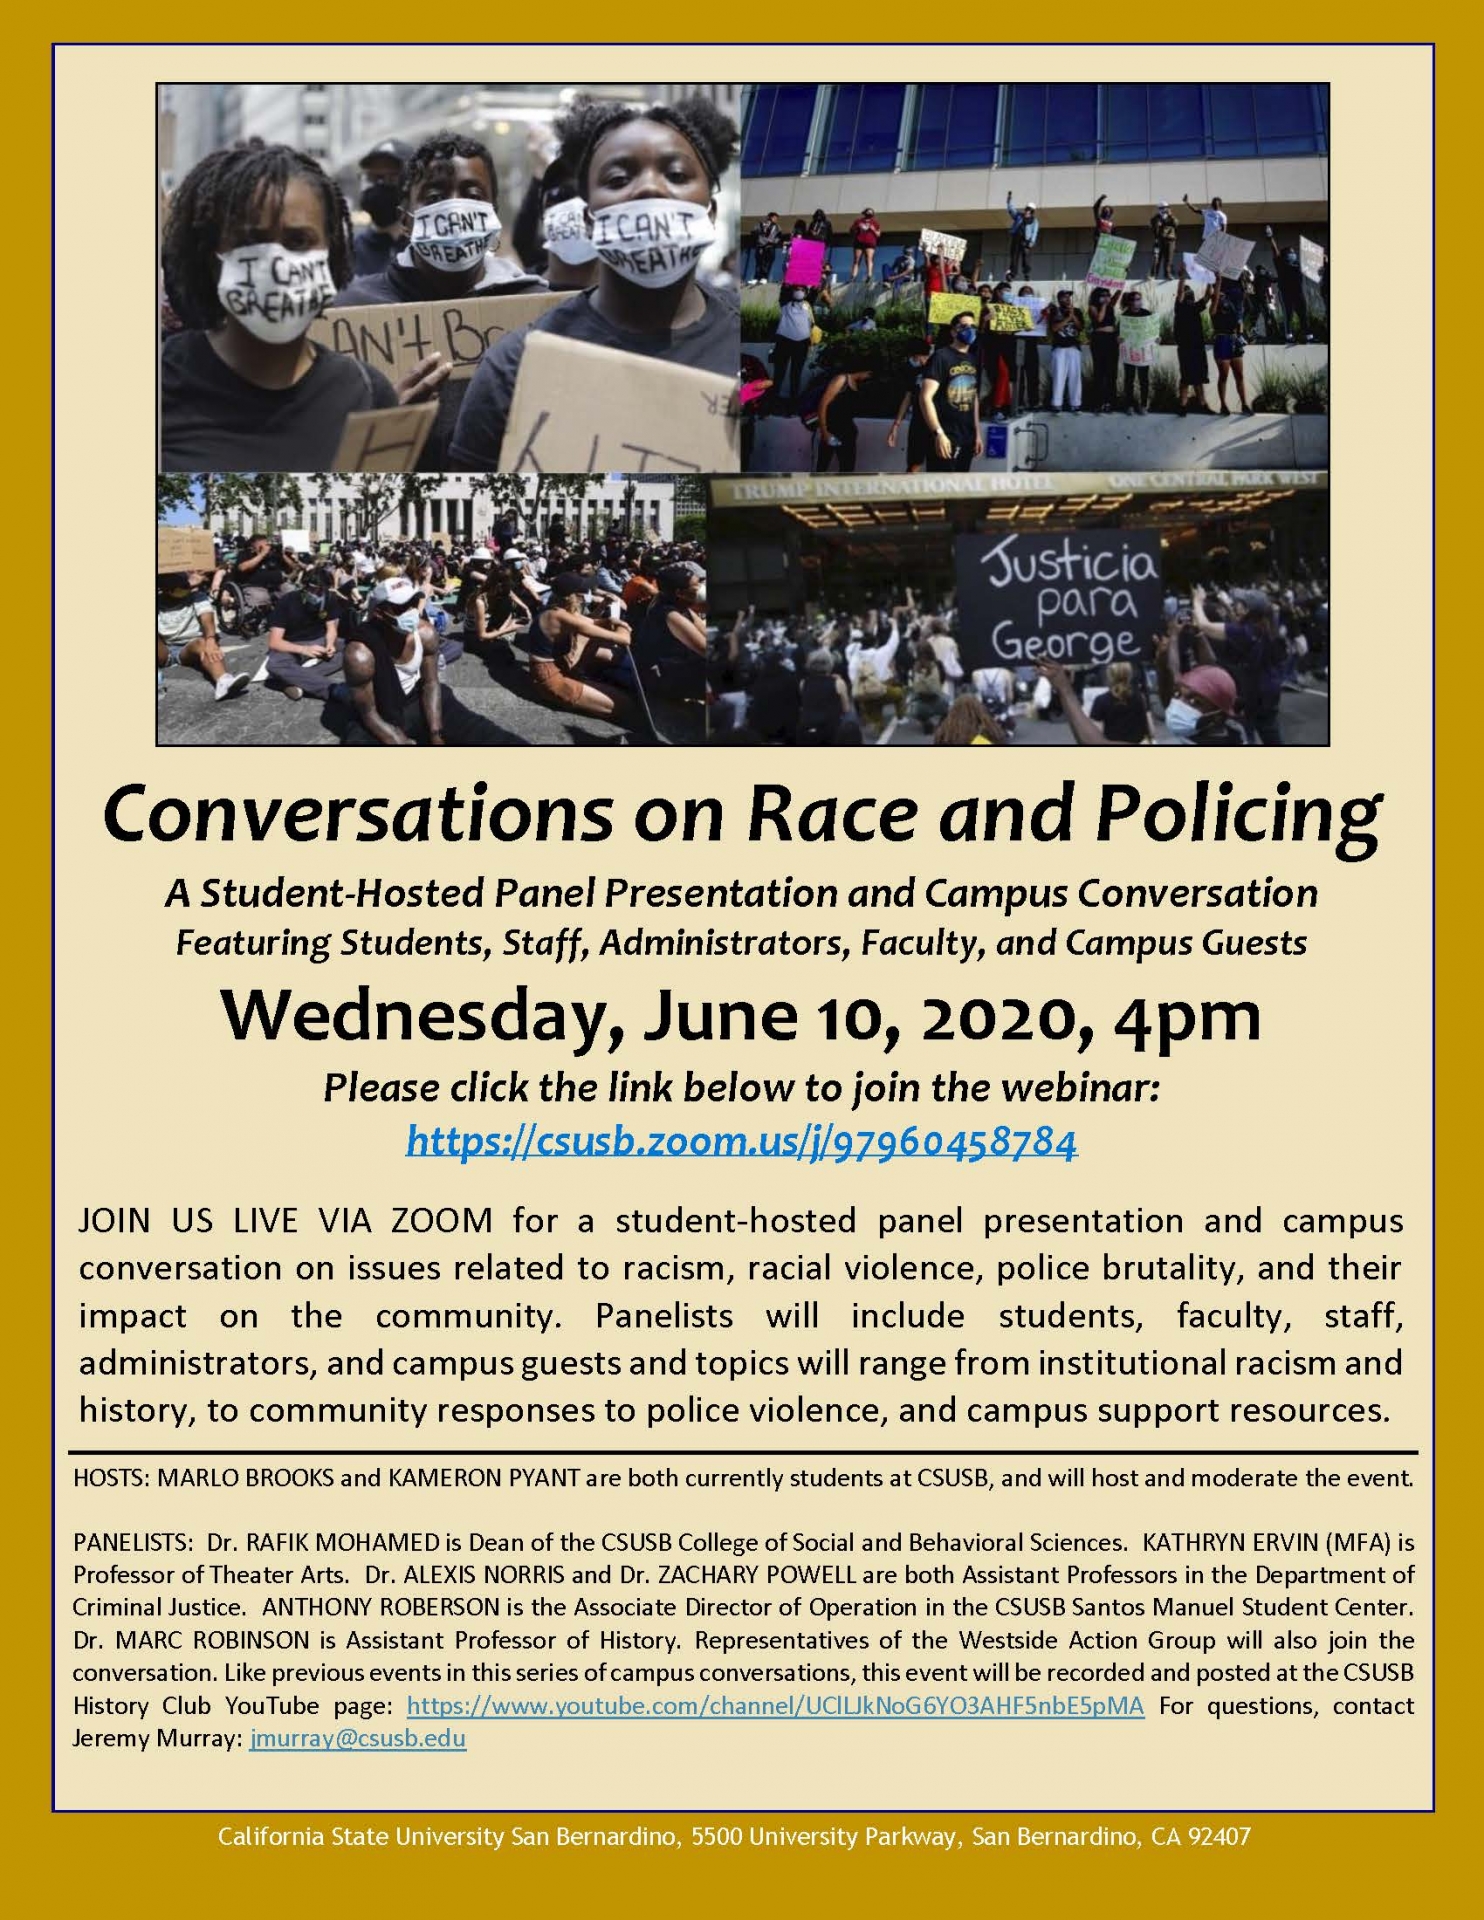 Race and Policing, June 10 flier